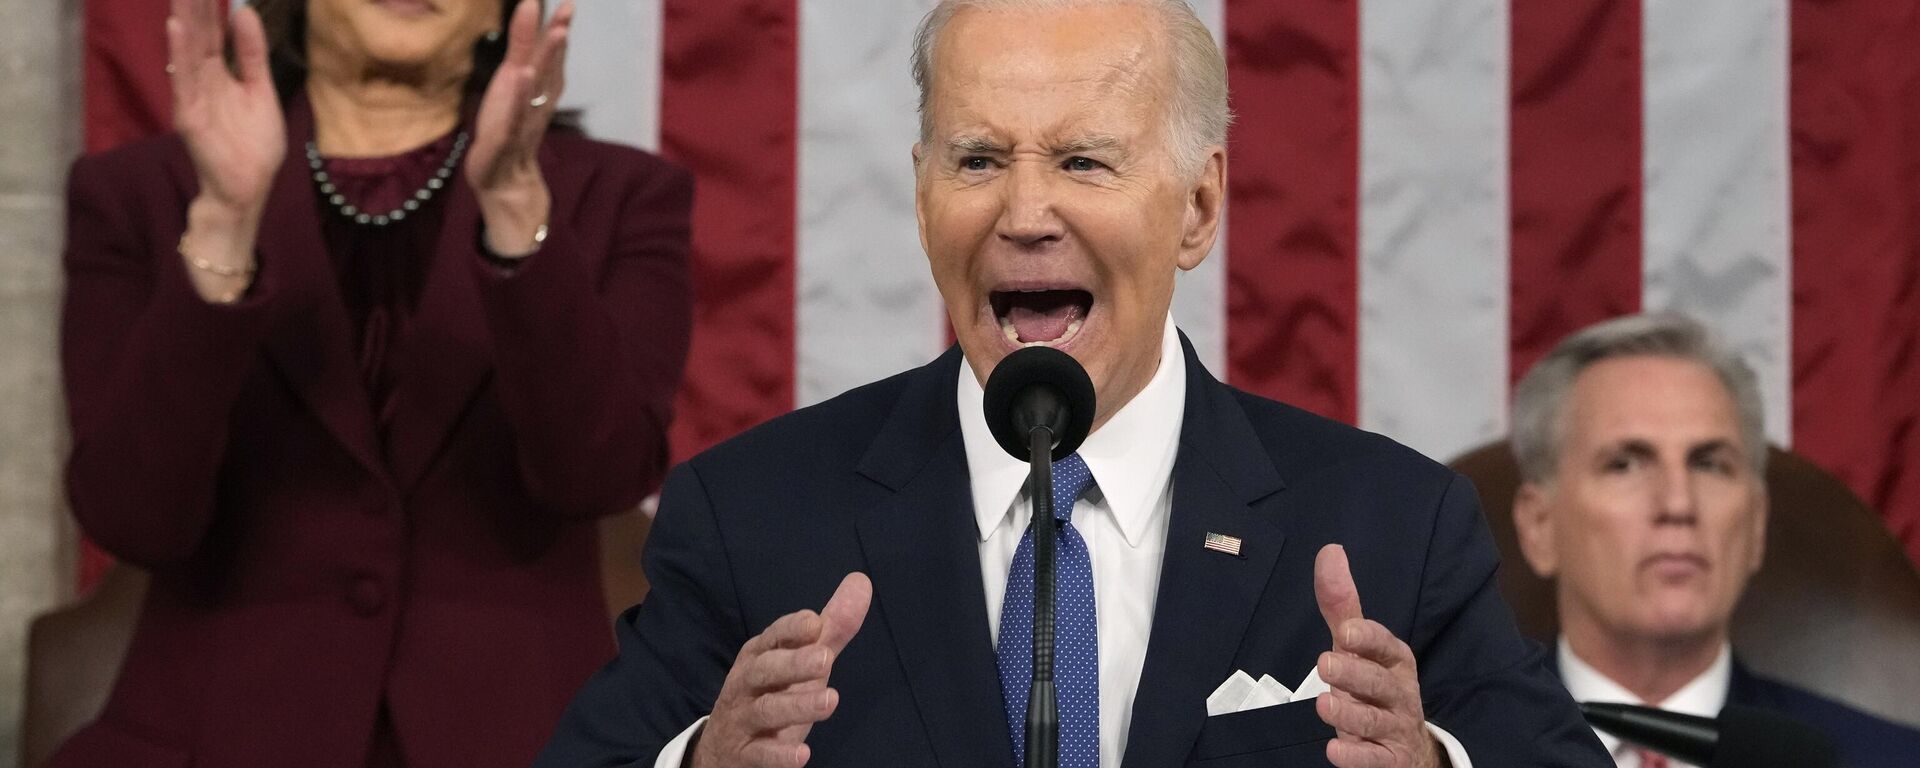 President Joe Biden talks about passing an assault weapons band as he delivers the State of the Union address to a joint session of Congress at the U.S. Capitol, Tuesday, Feb. 7, 2023, in Washington. - Sputnik International, 1920, 08.02.2023